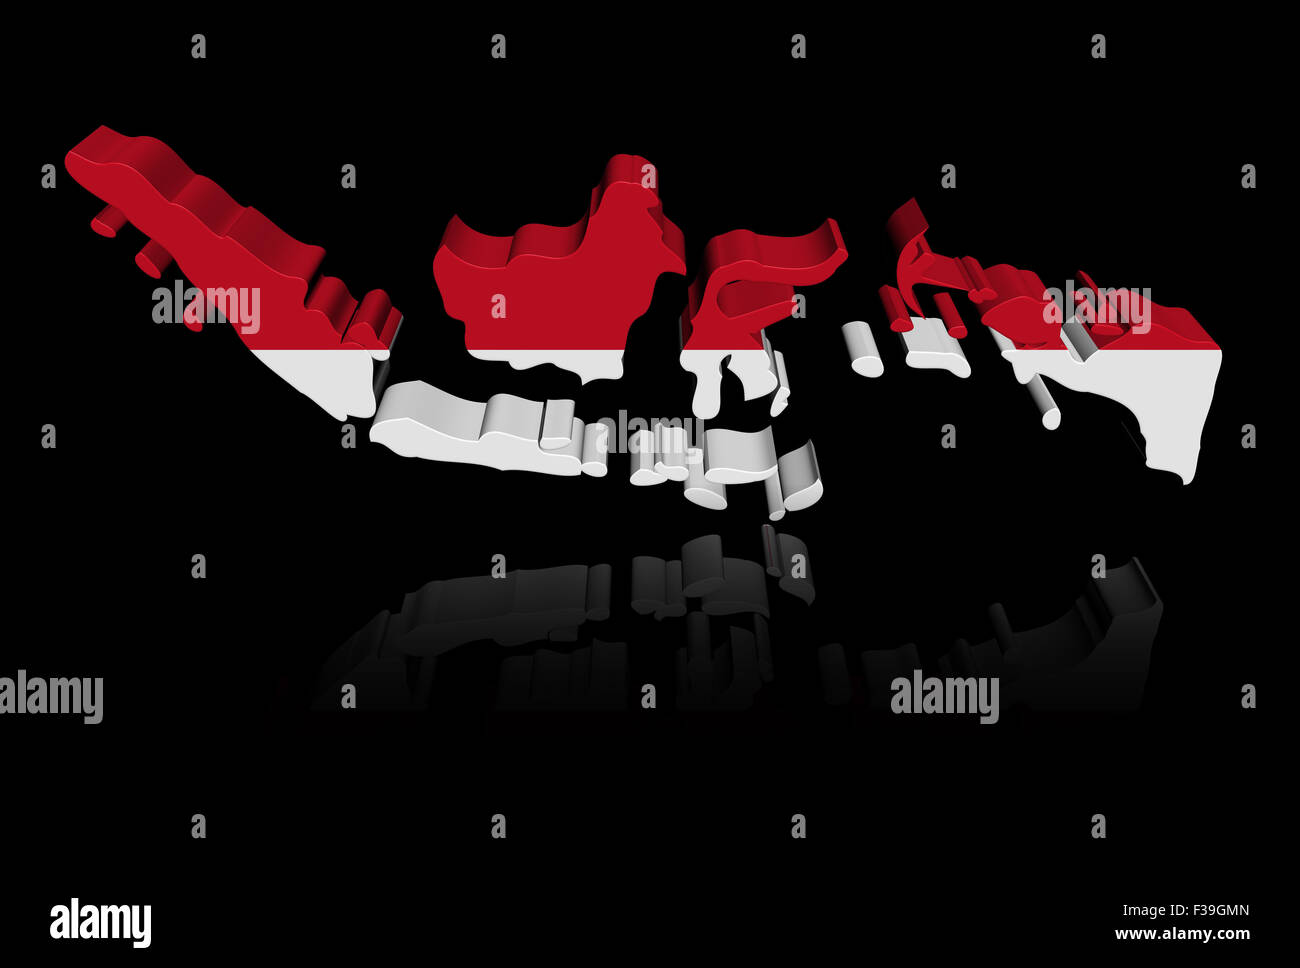 Indonesia map flag with reflection illustration Stock Photo